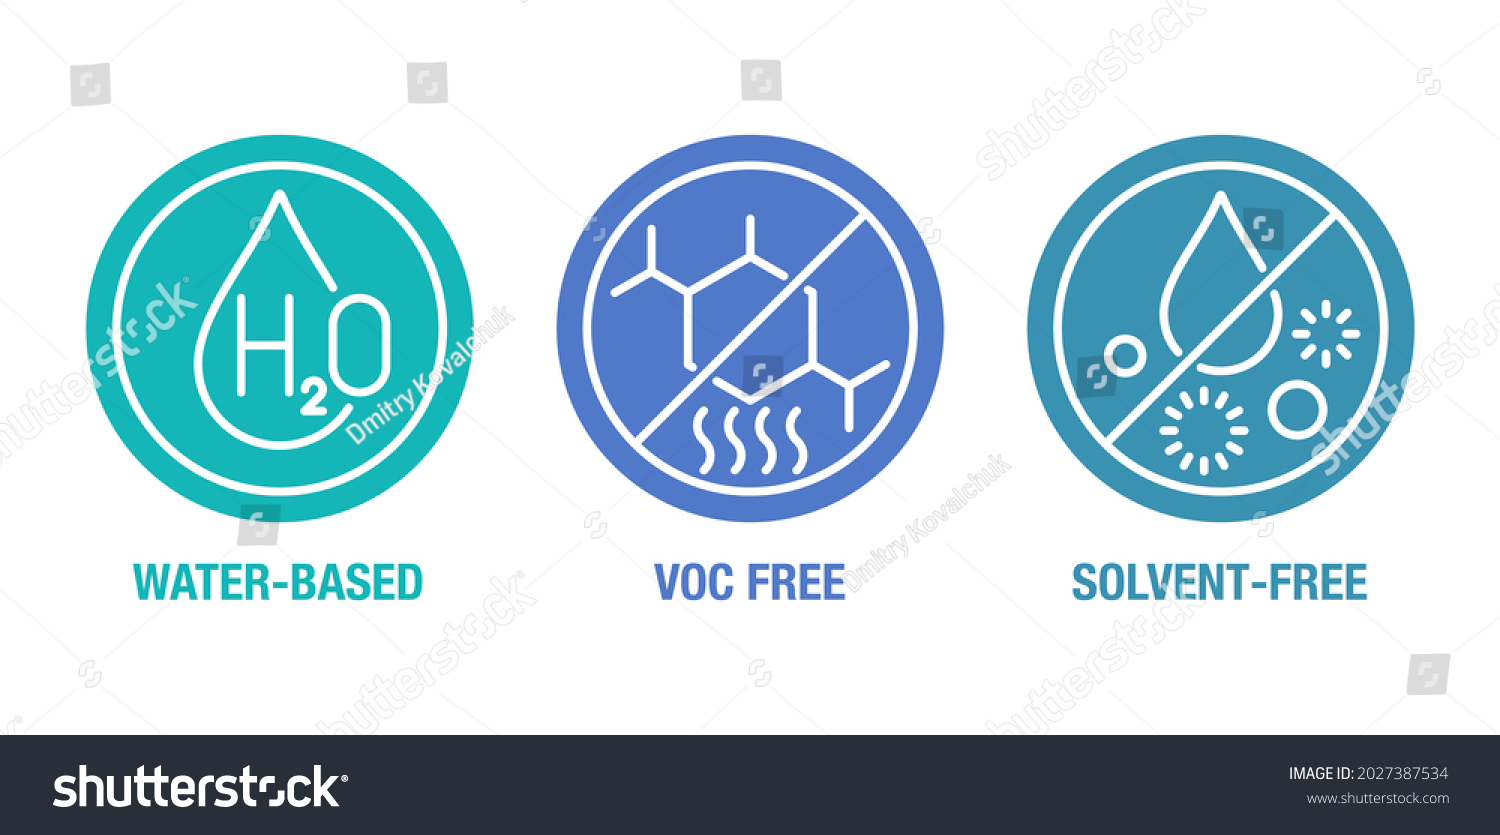 SVG of Water-based, VOC free and Solvent free - flat icons set for labeling of cleaning agent or household chemicals svg